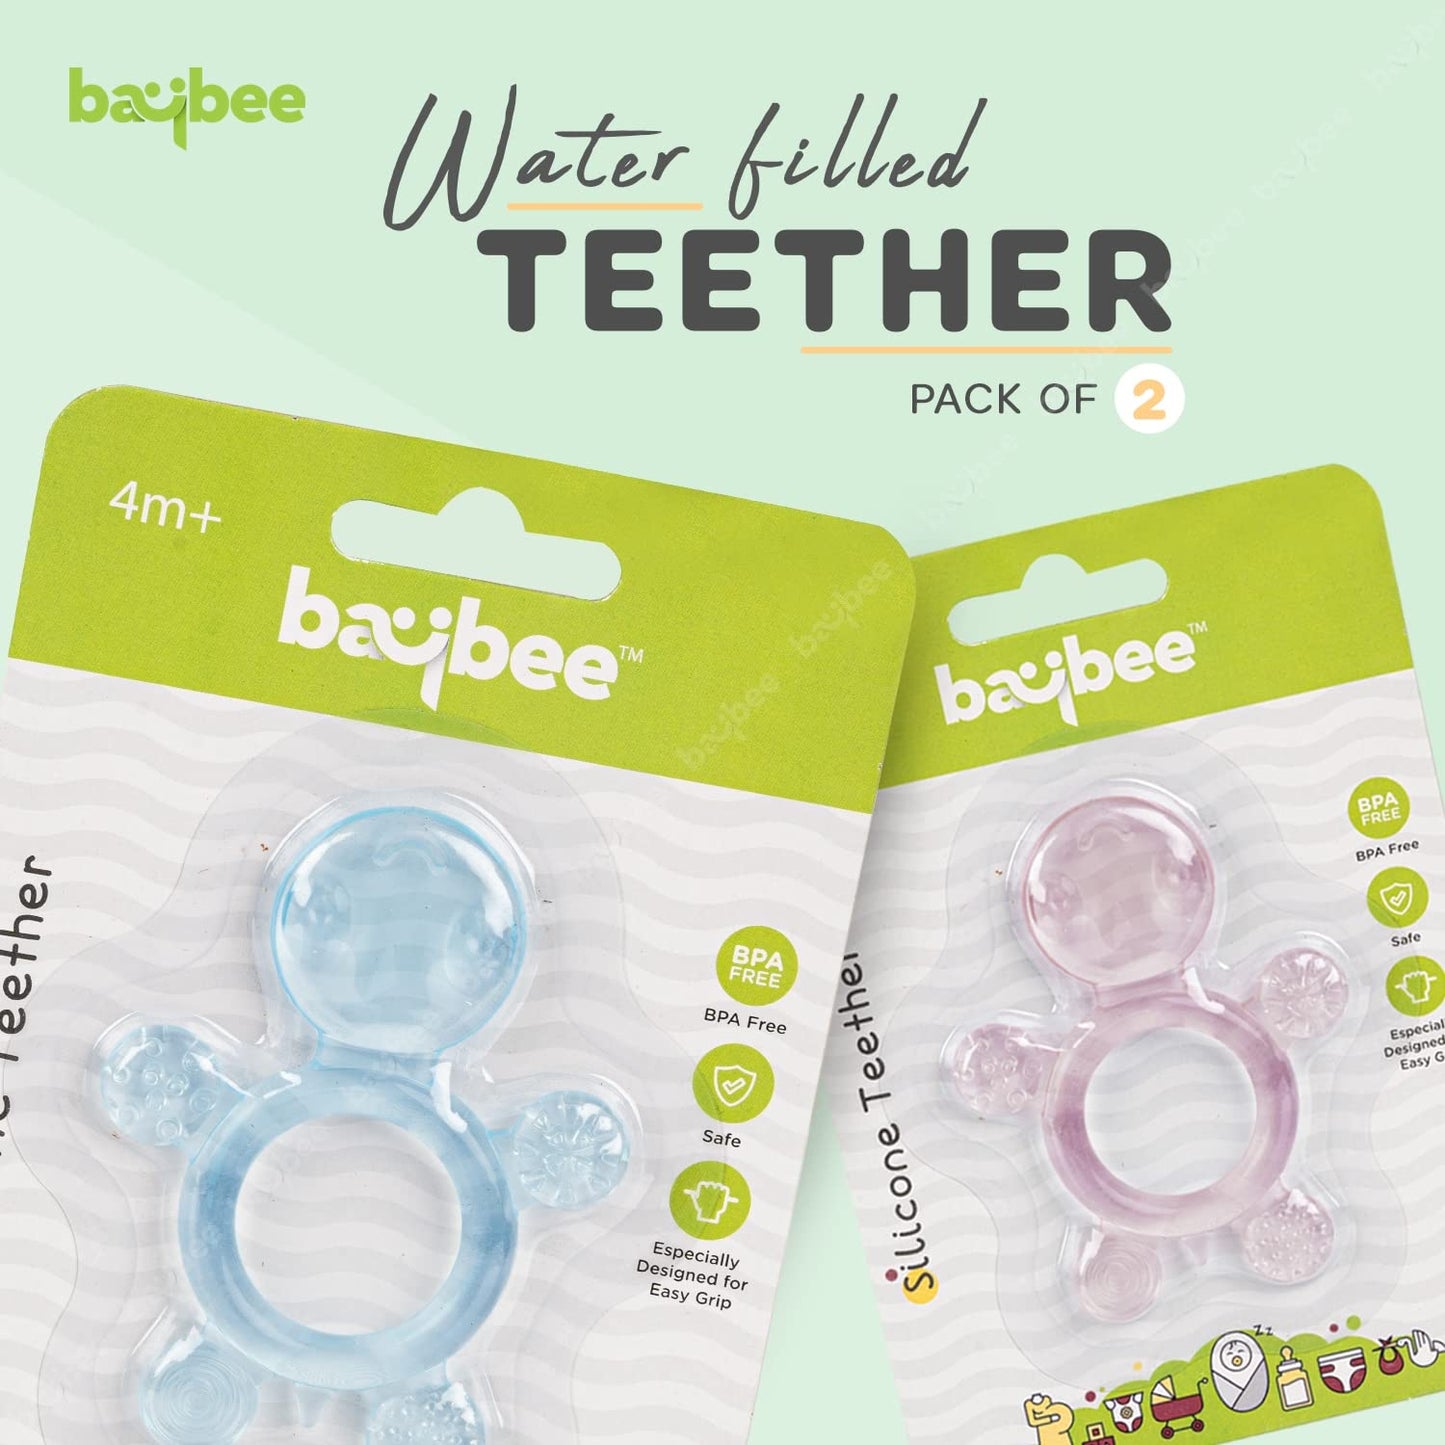 Baybee Natural Silicon Teether for Babies Non-Toxic Food Grade & BPA-Free (Pack of 2)